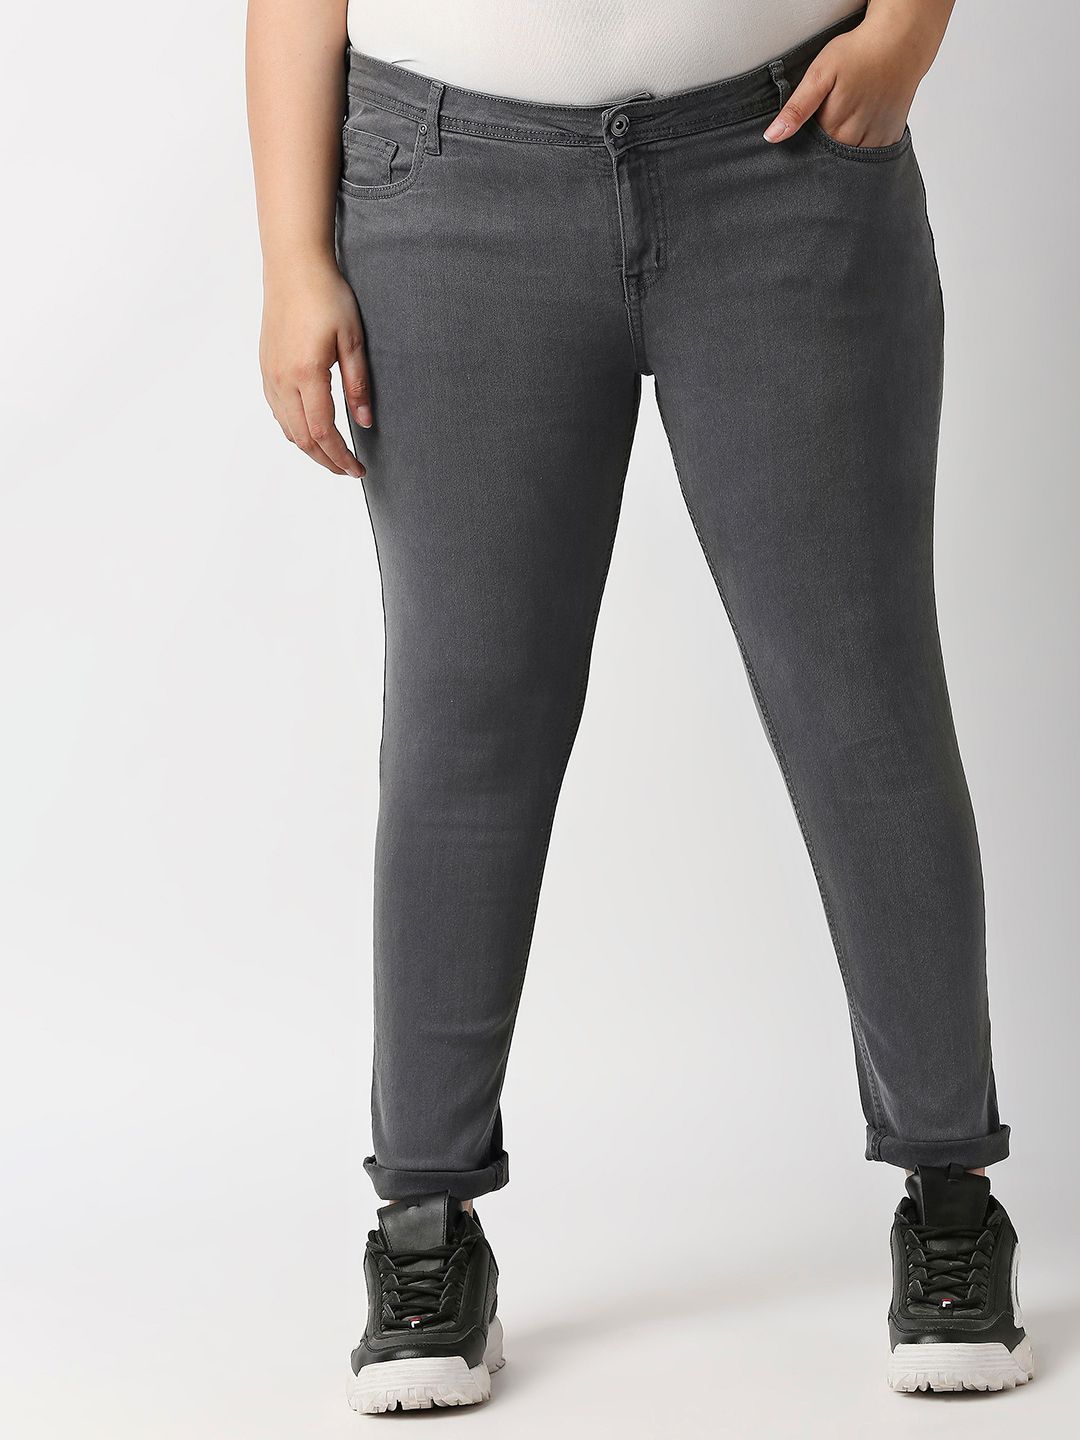 High Star Women Plus Size Grey Solid Slim Fit Stretchable Jeans Price in India